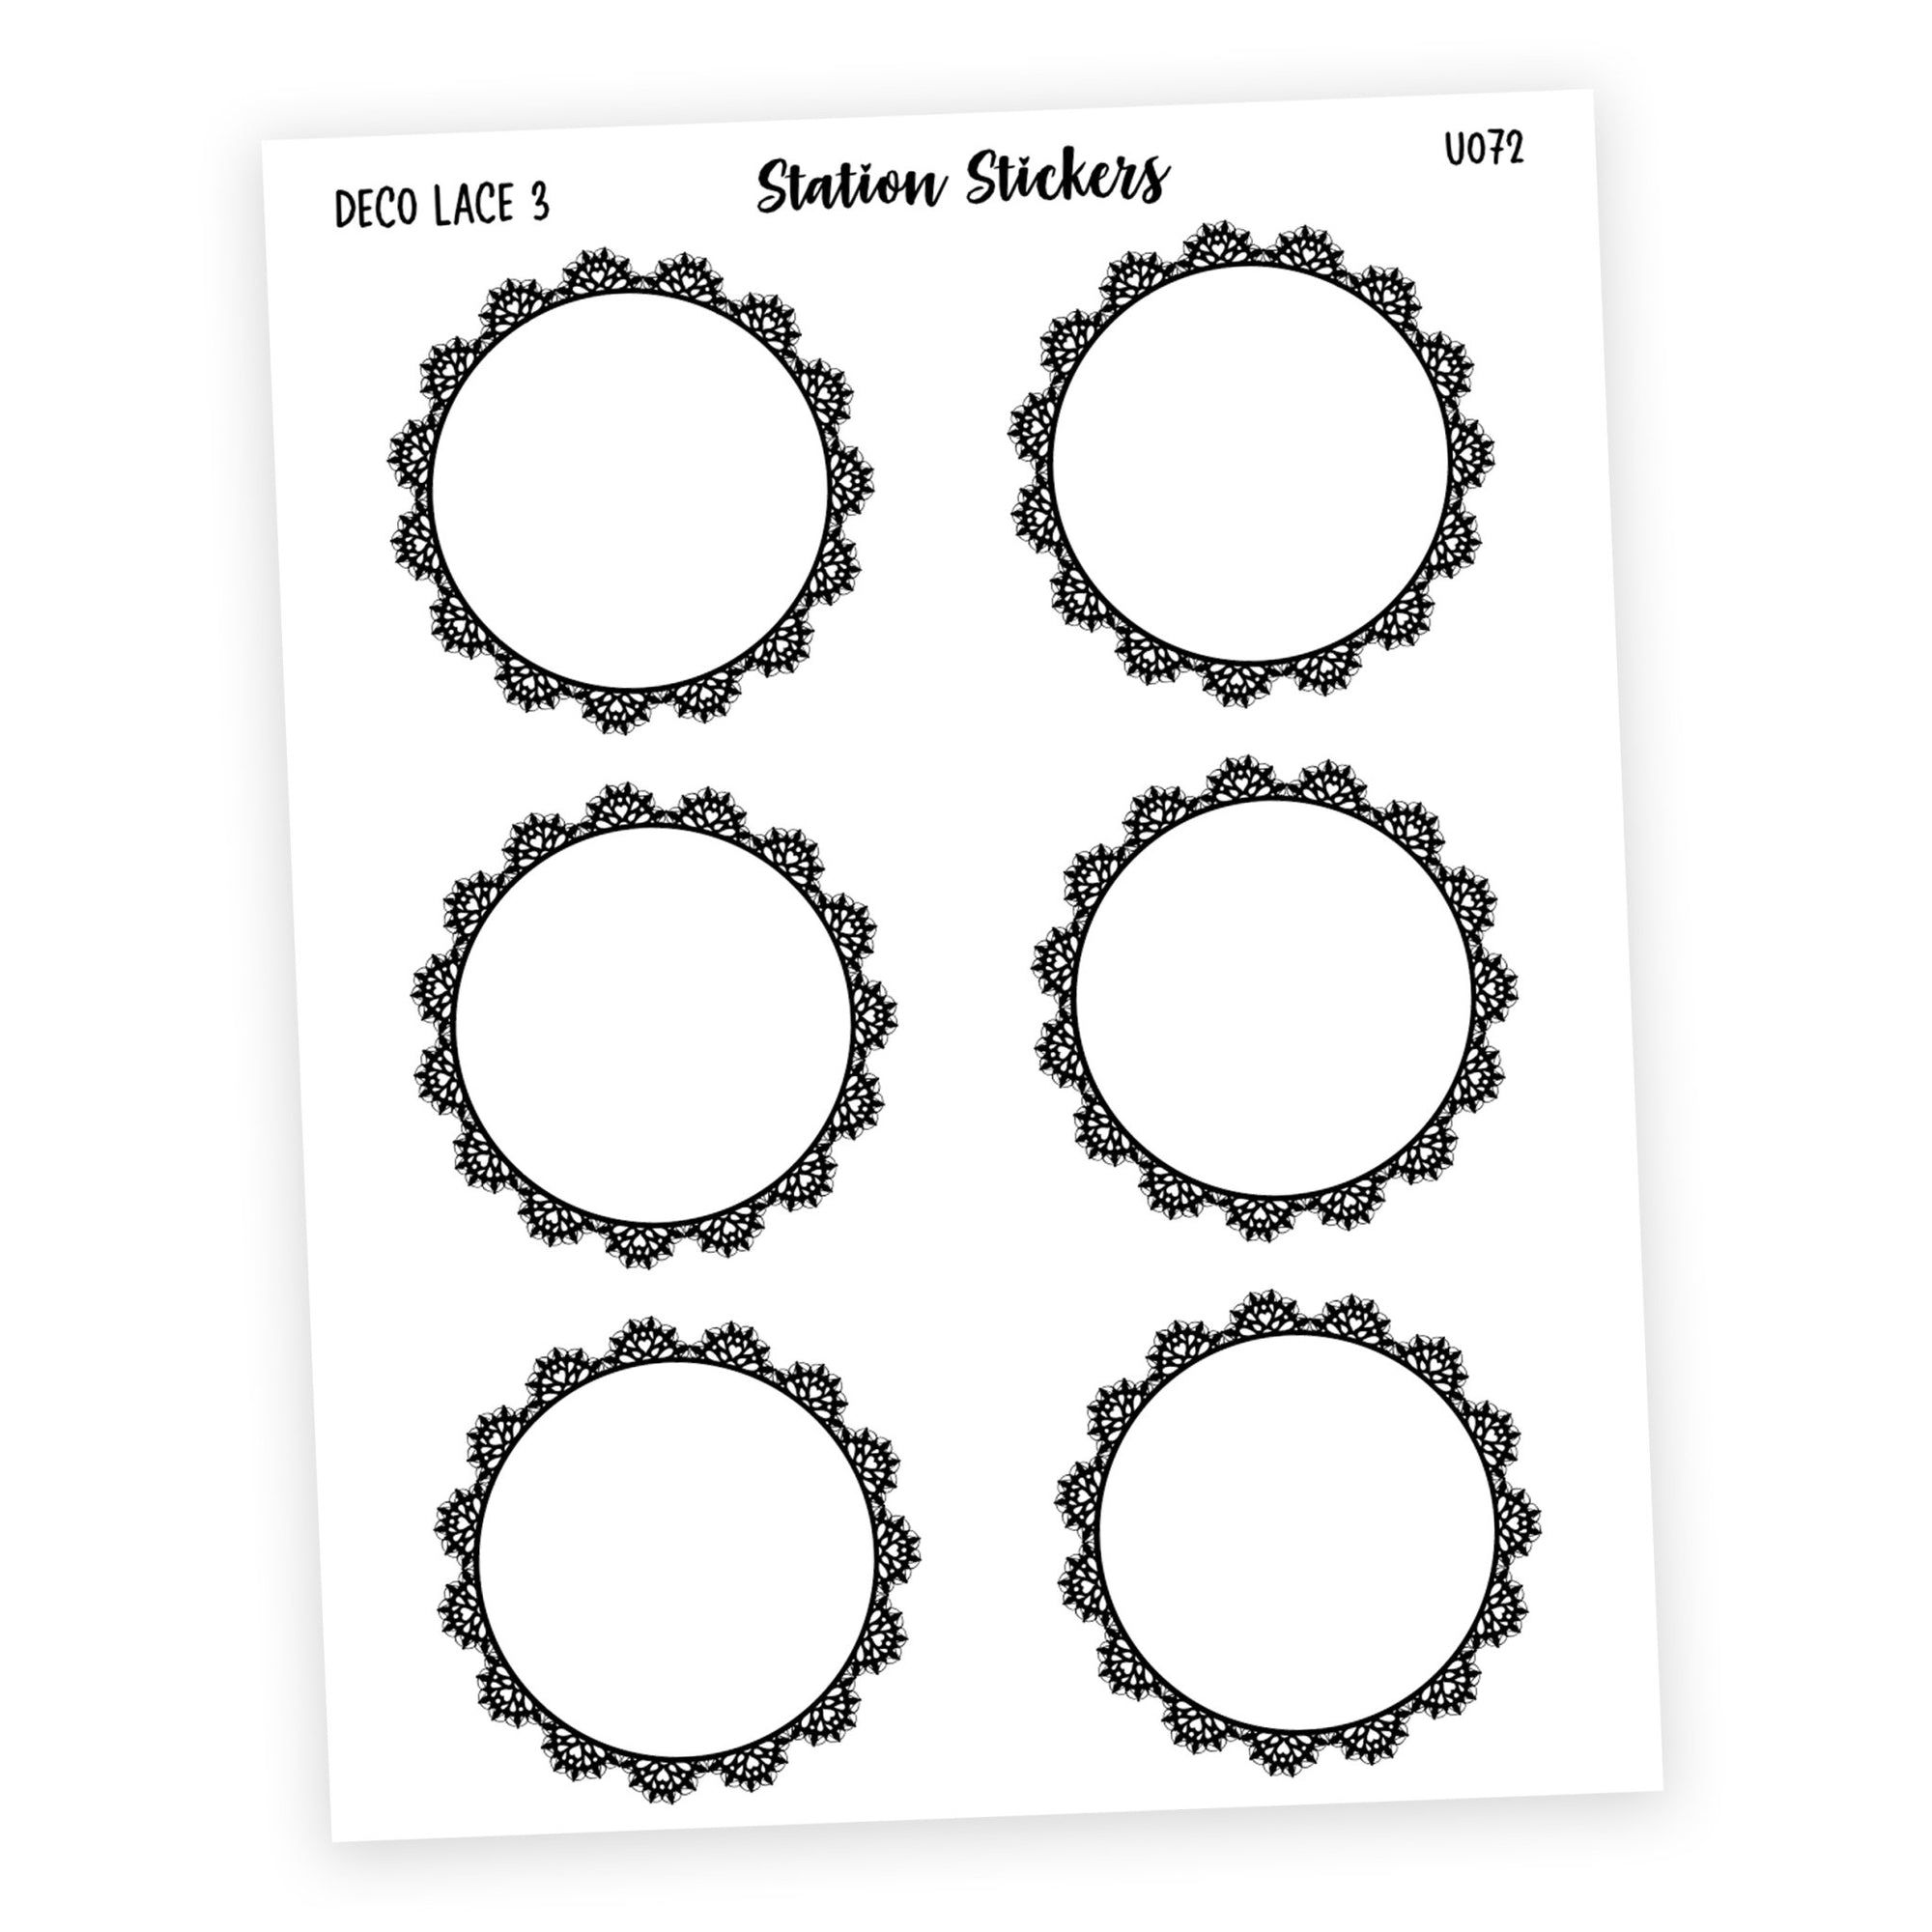 DECO • LACE 3 - Station Stickers